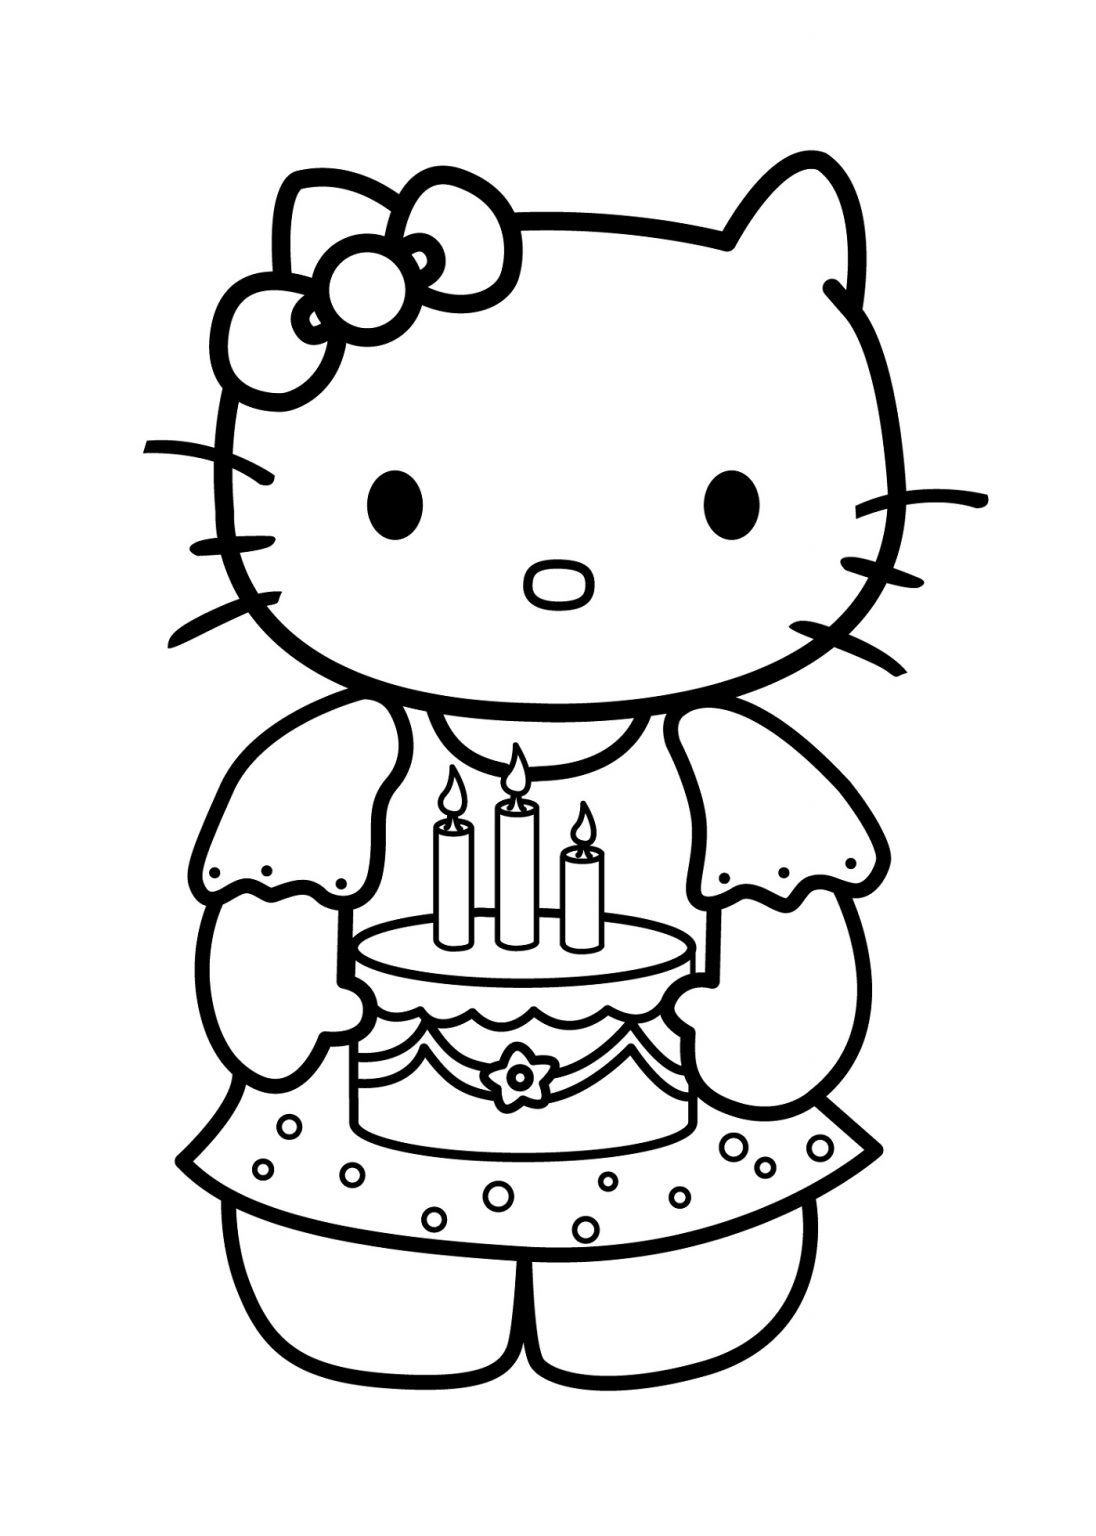 Adorable Kitty Cat Coloring Pages - 101 Coloring